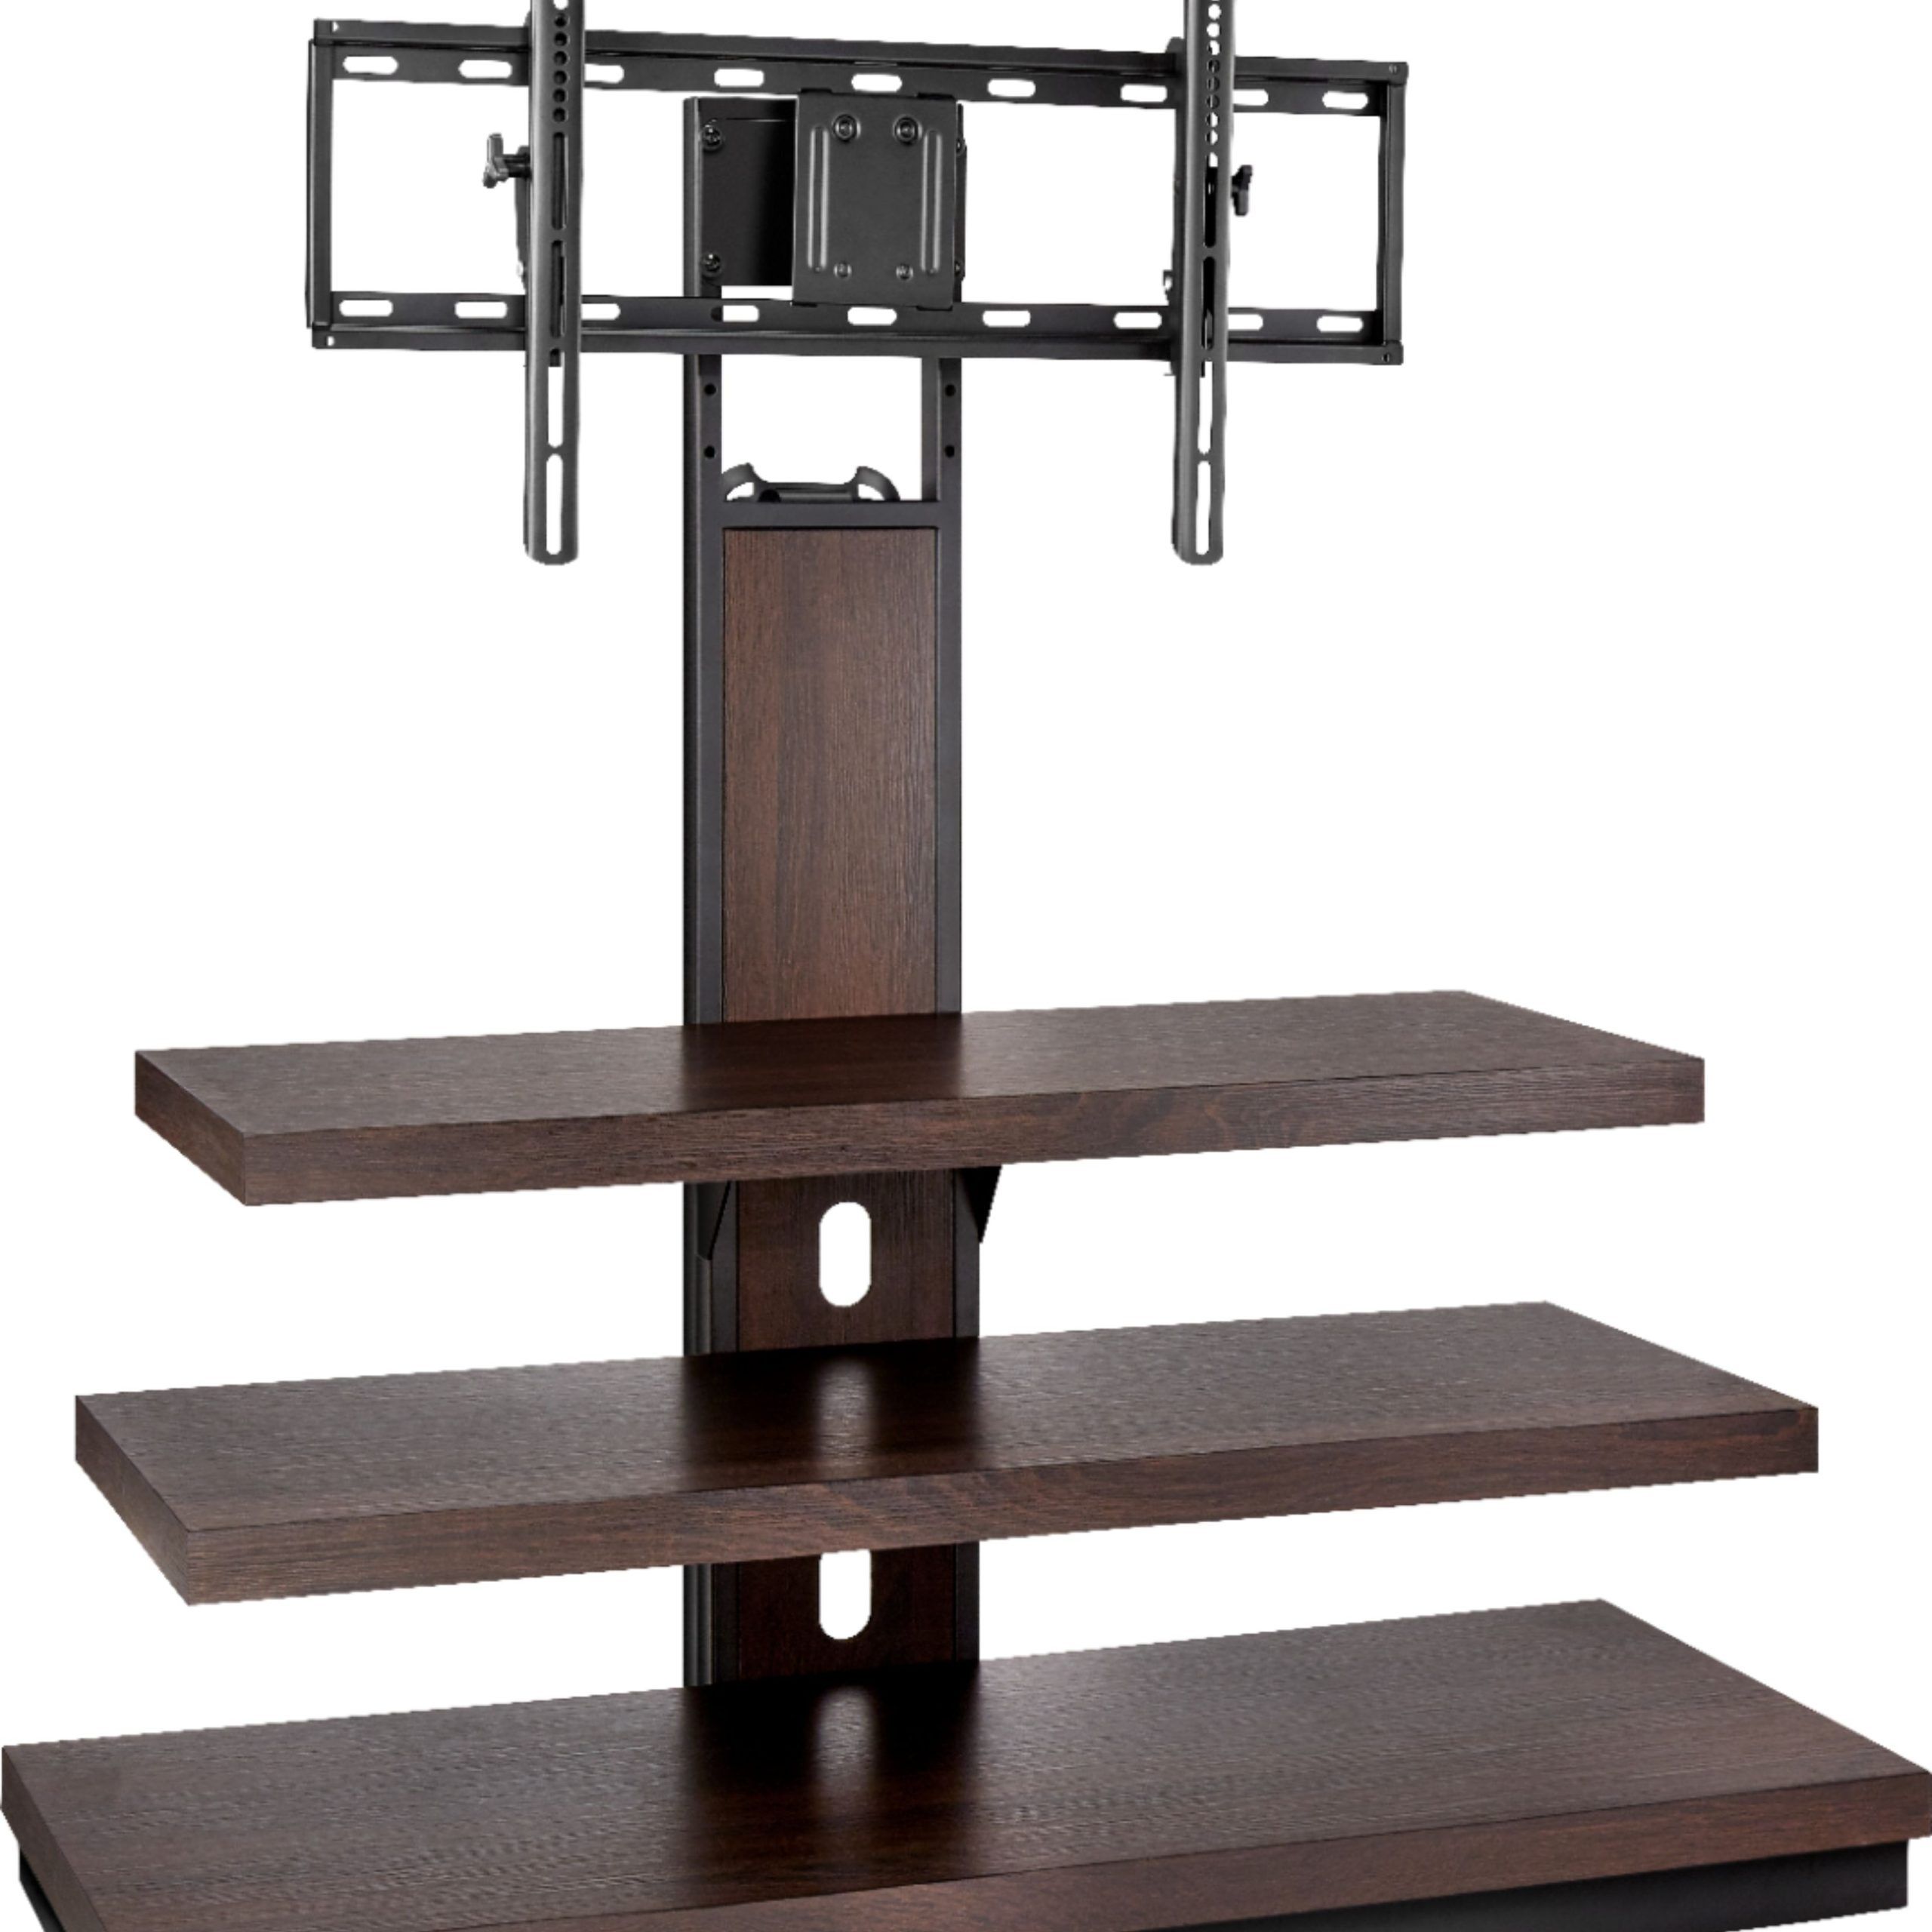 Best Buy: Insignia™ Tv Stand For Most Flat Panel Tvs Up To 55" Dark Brown  Ns Hwmc1848 Regarding Top Shelf Mount Tv Stands (View 3 of 15)